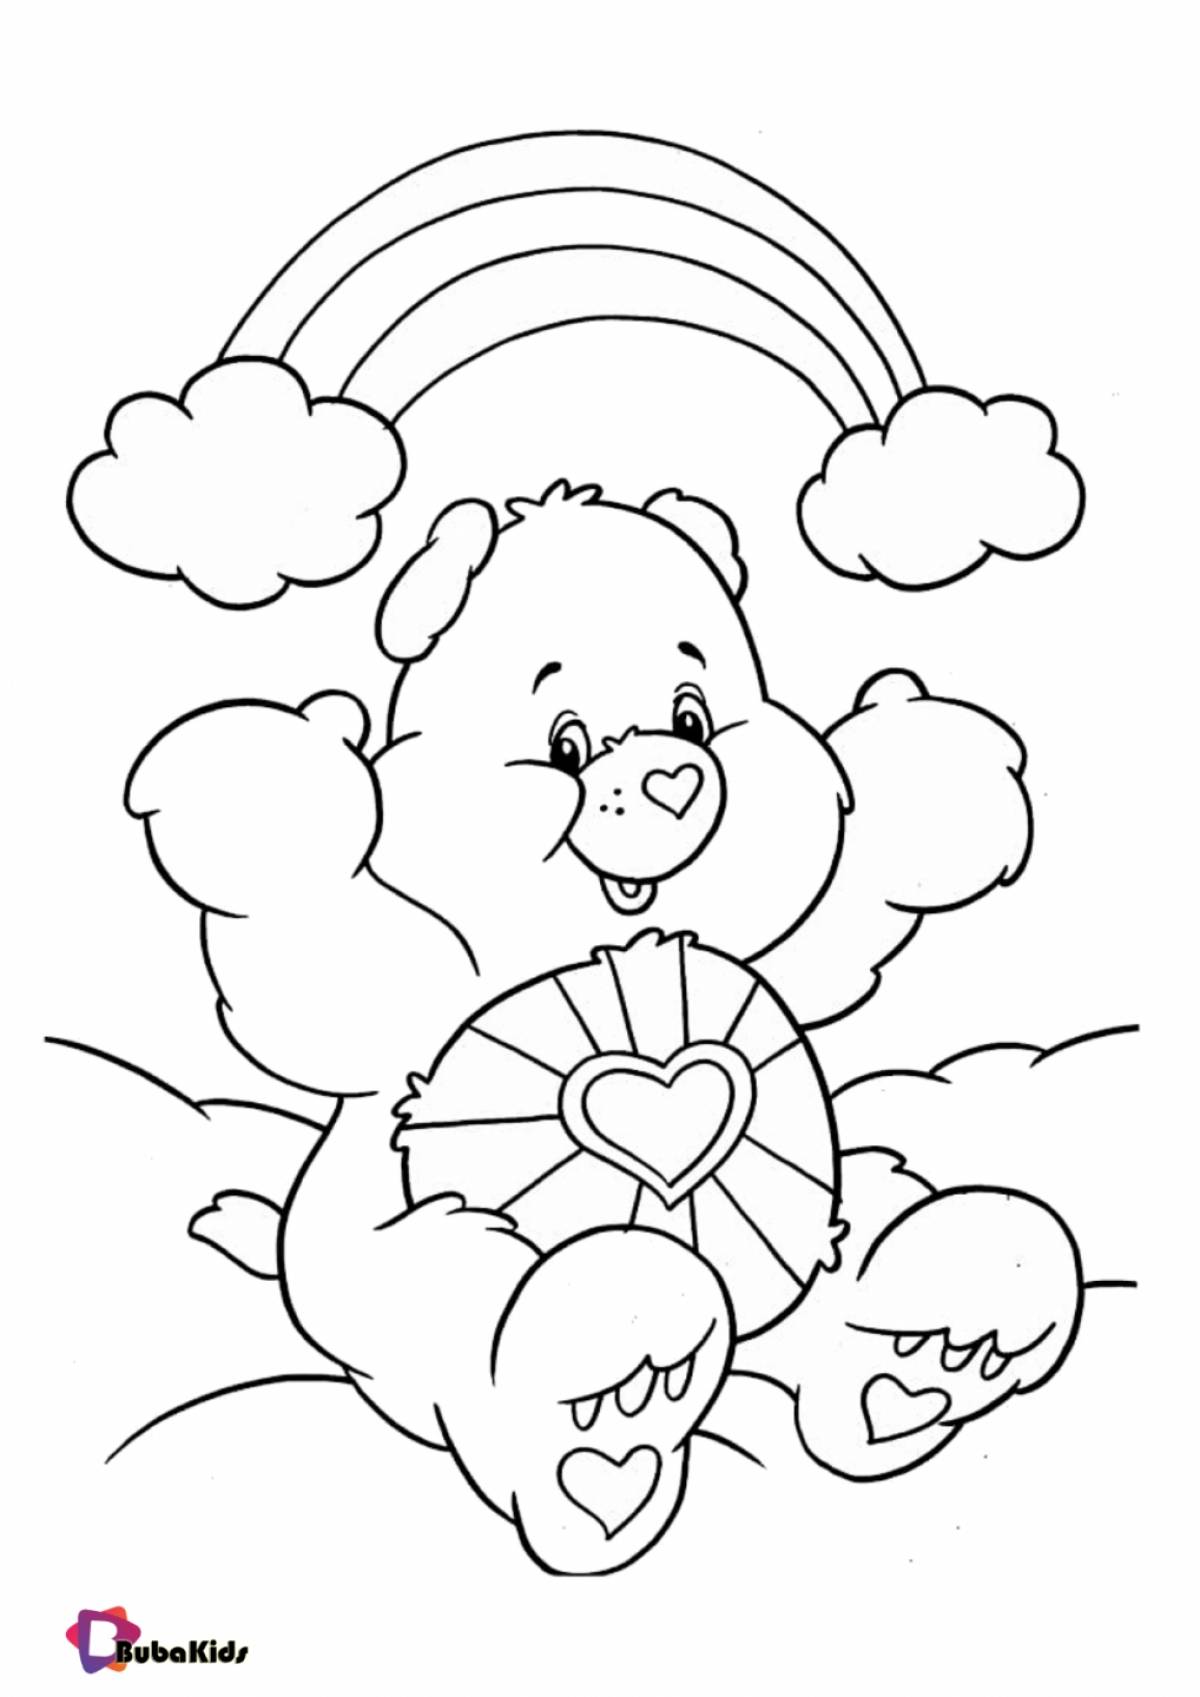 Teddy bear coloring book for 4-5 year olds